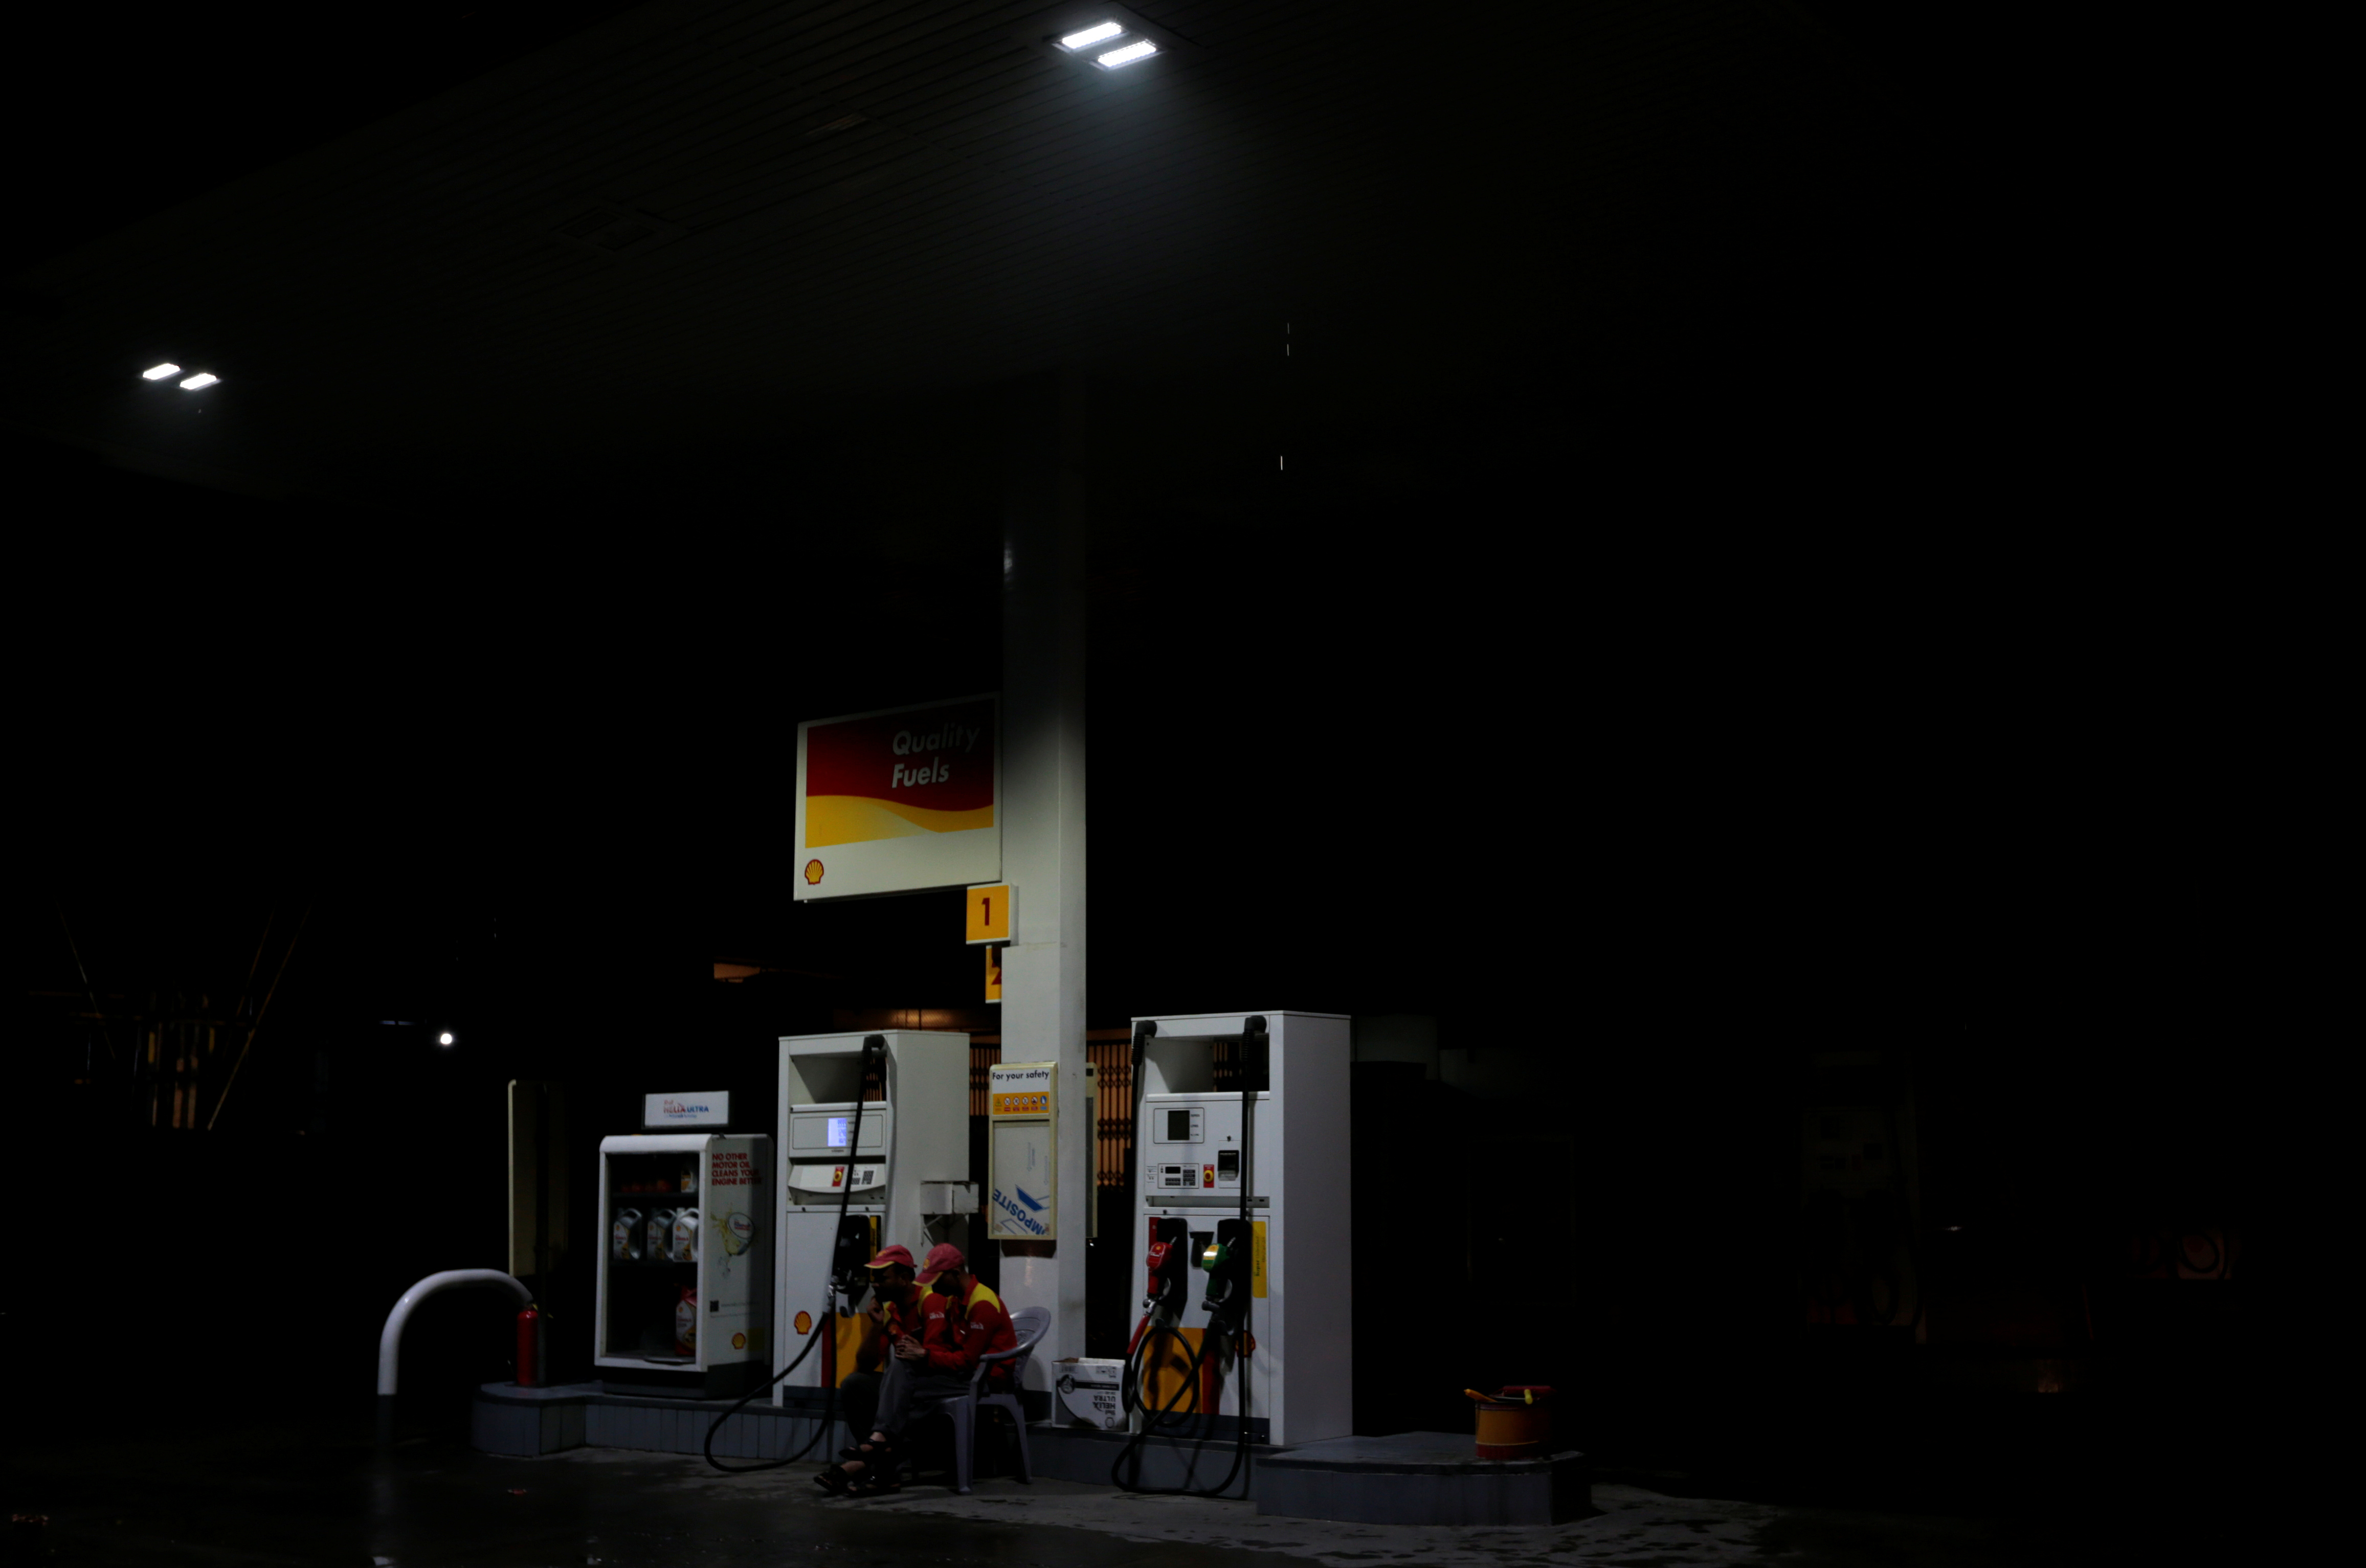 Employees sit next to fuel pumps as they close the petrol station after running out of petrol, in Islamabad